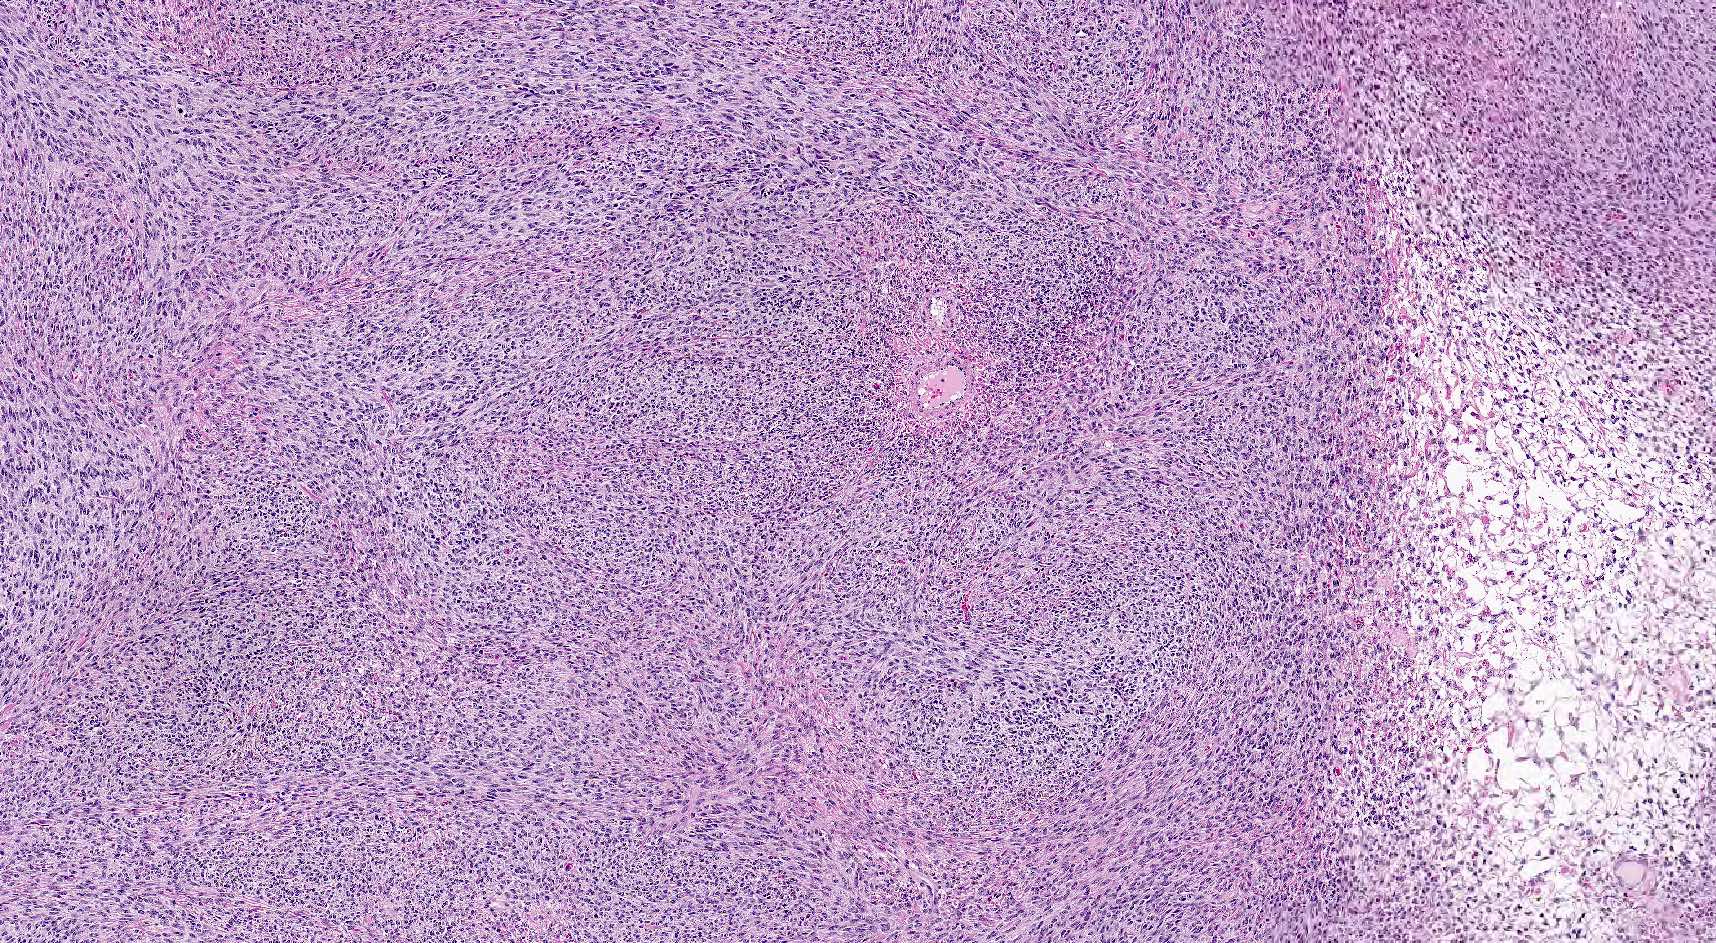 Cellular spindle cell neoplasm